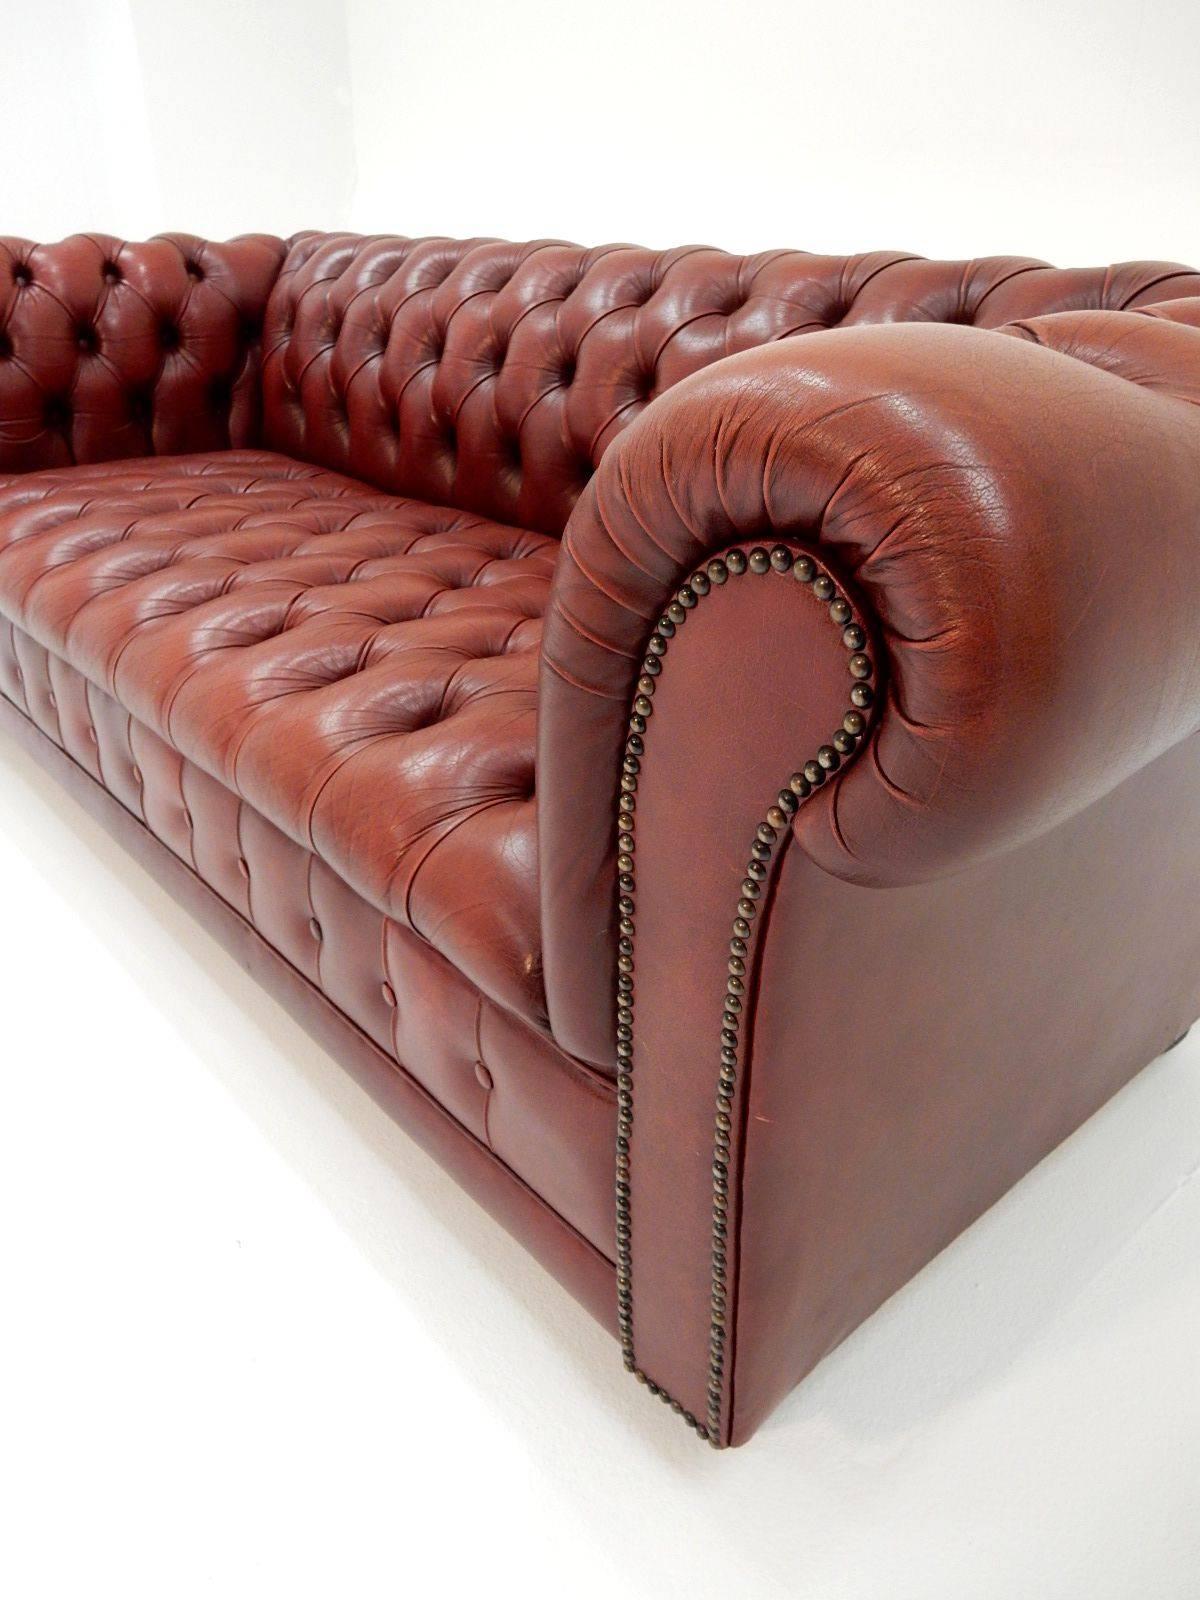 Fabulous Tufted Oxblood Leather British Chesterfield Sofa 2